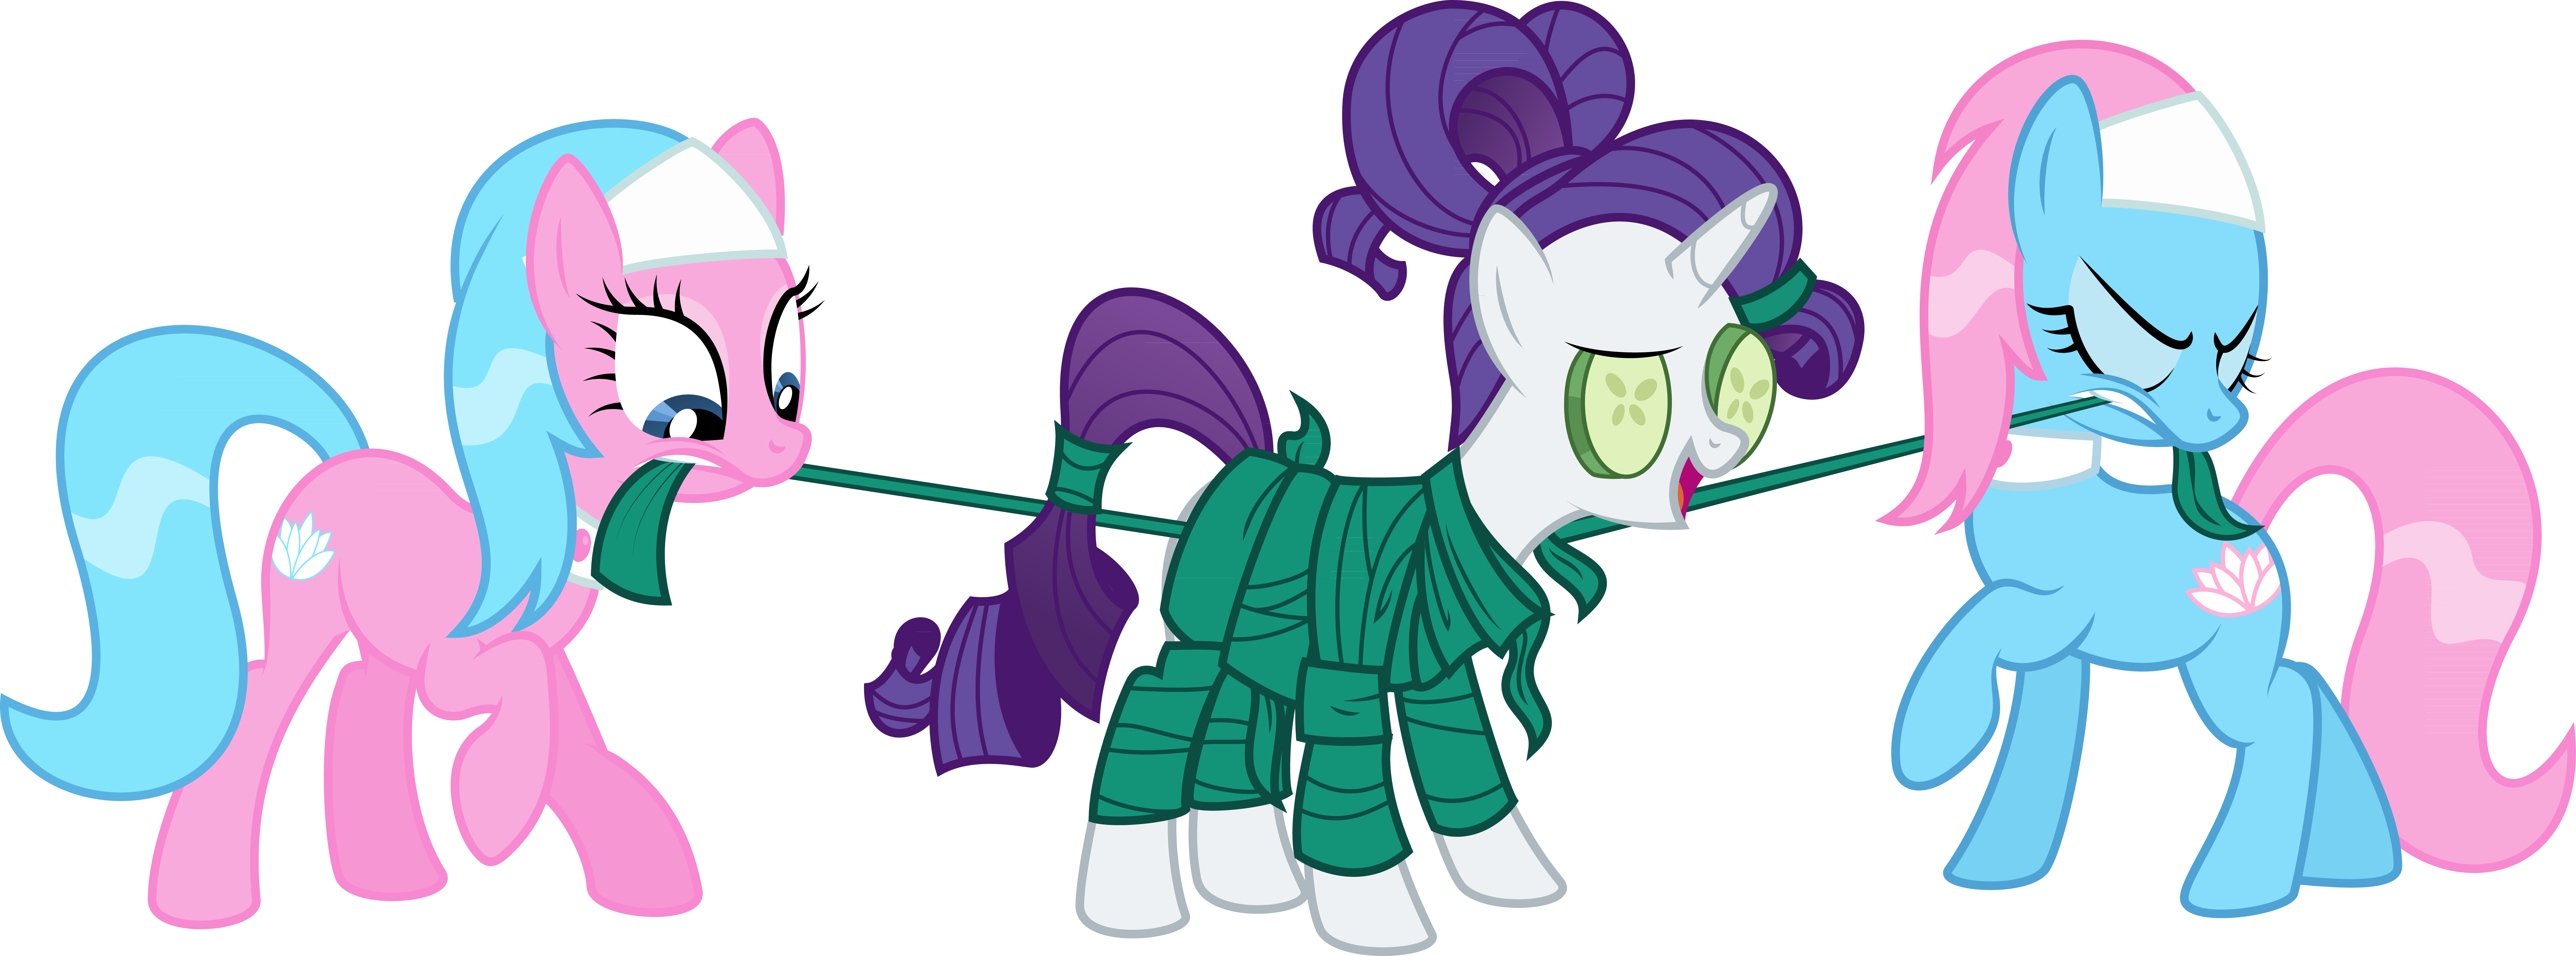 rarity_seaweed_and_also_spa_ponies_by_ra